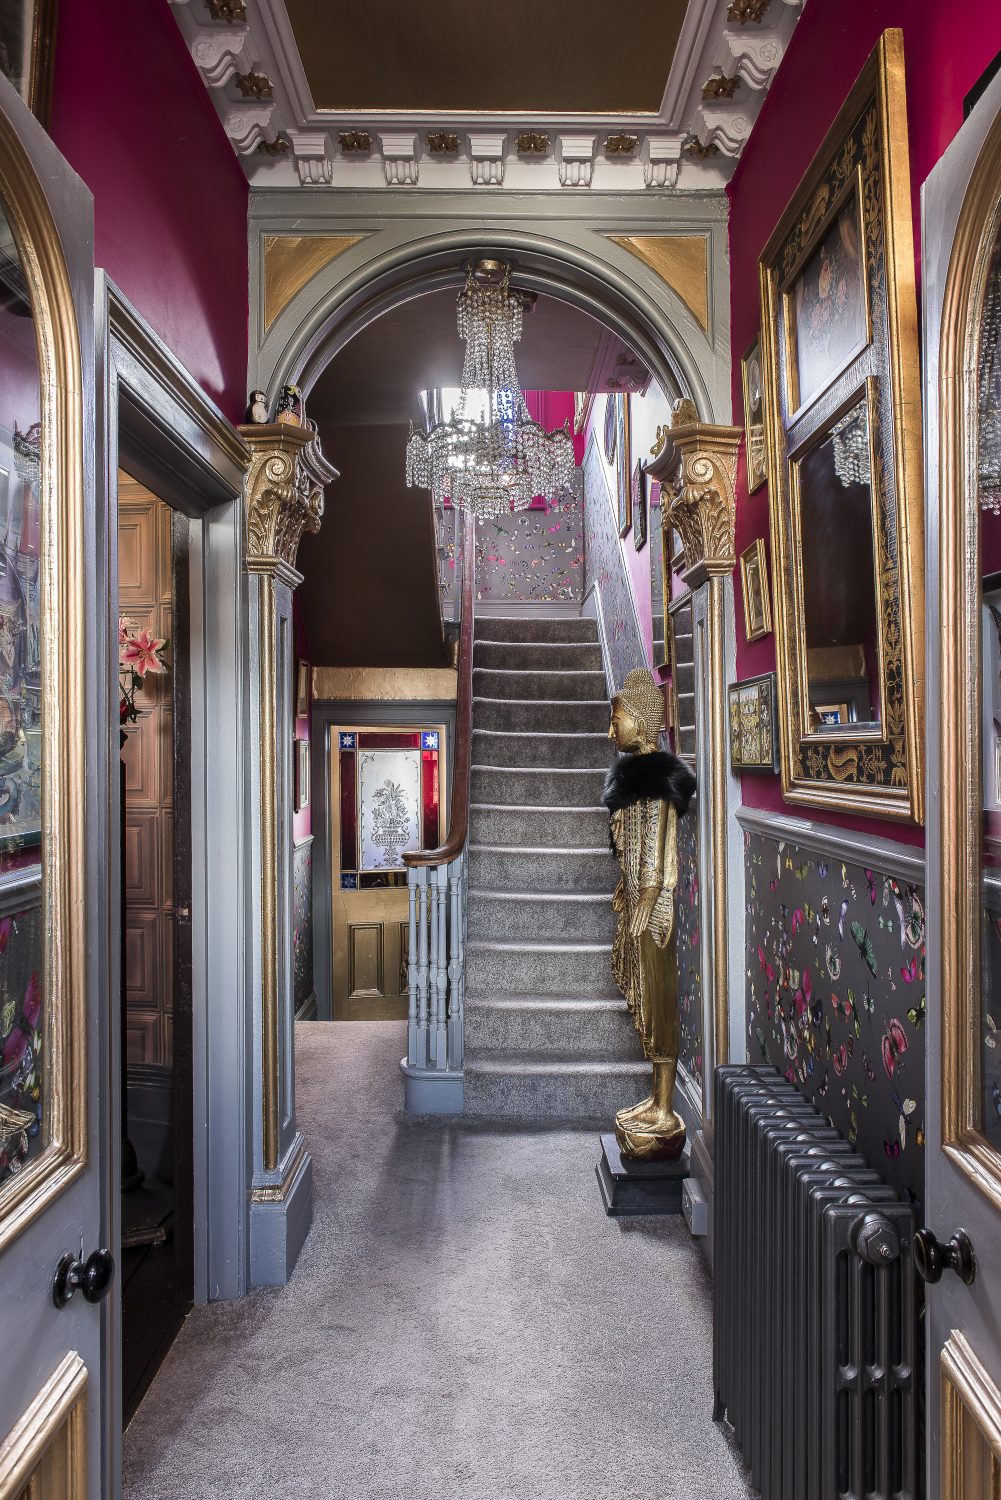 With its wall of mirrors, the hallway is Annemarie’s ‘homage to Versailles’. The butterfly wallpaper in the hall and up the stairs is by Christian Lacroix